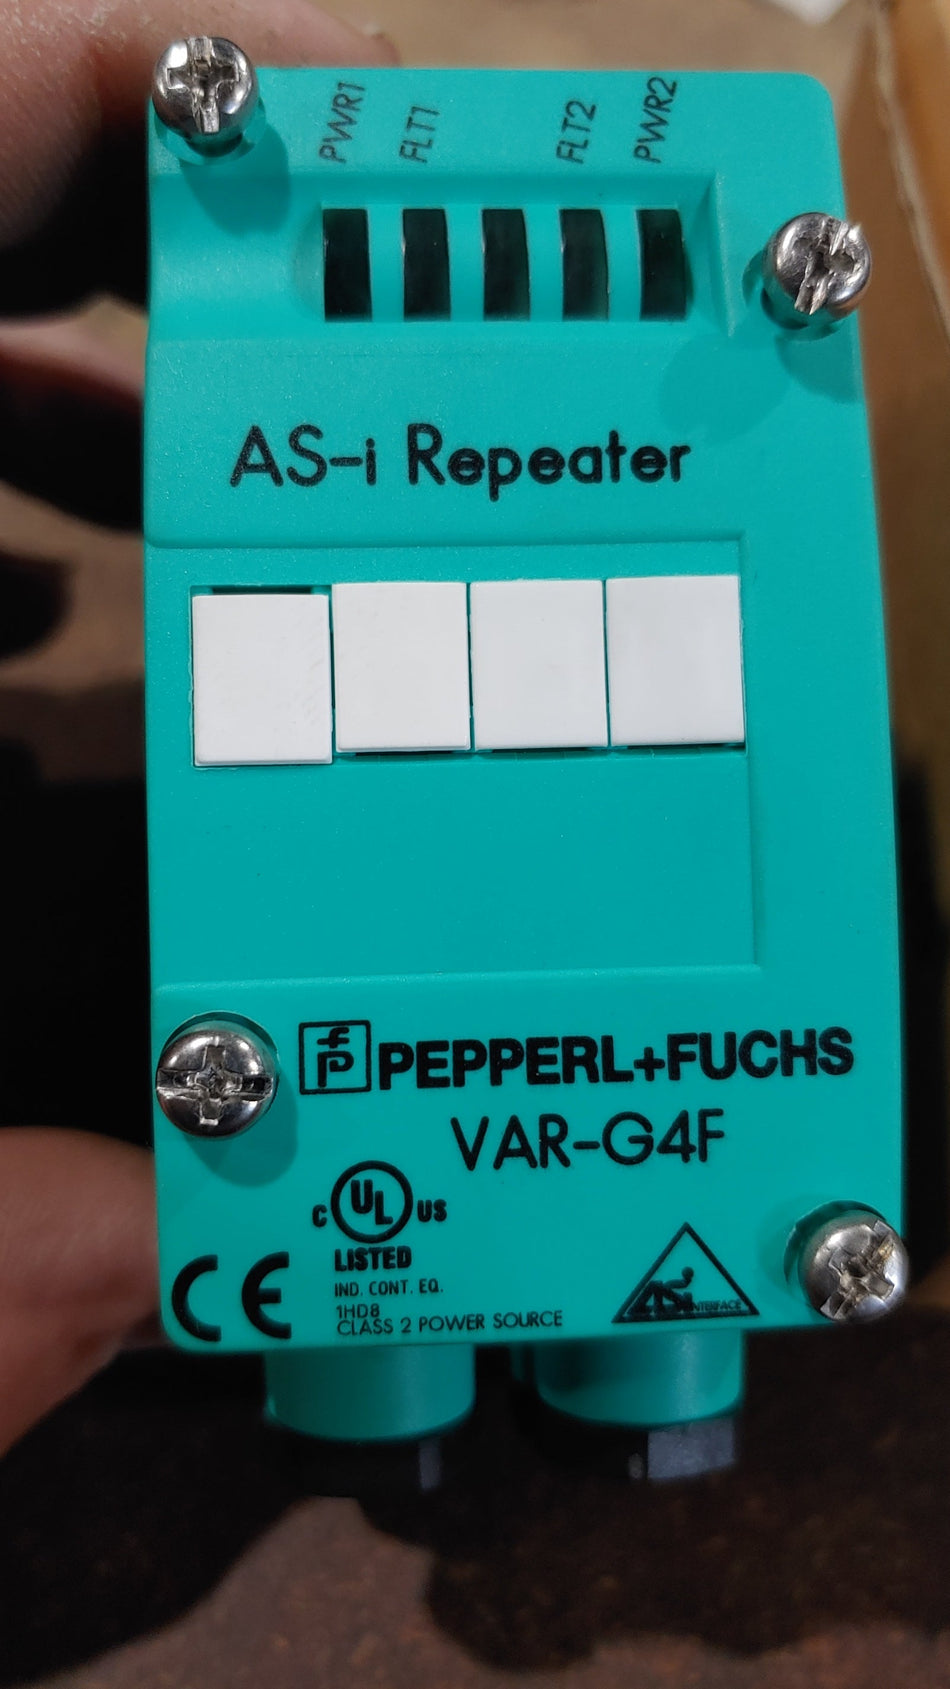 Pepperl+Fuchs AS-Interface repeater VAR-G4F